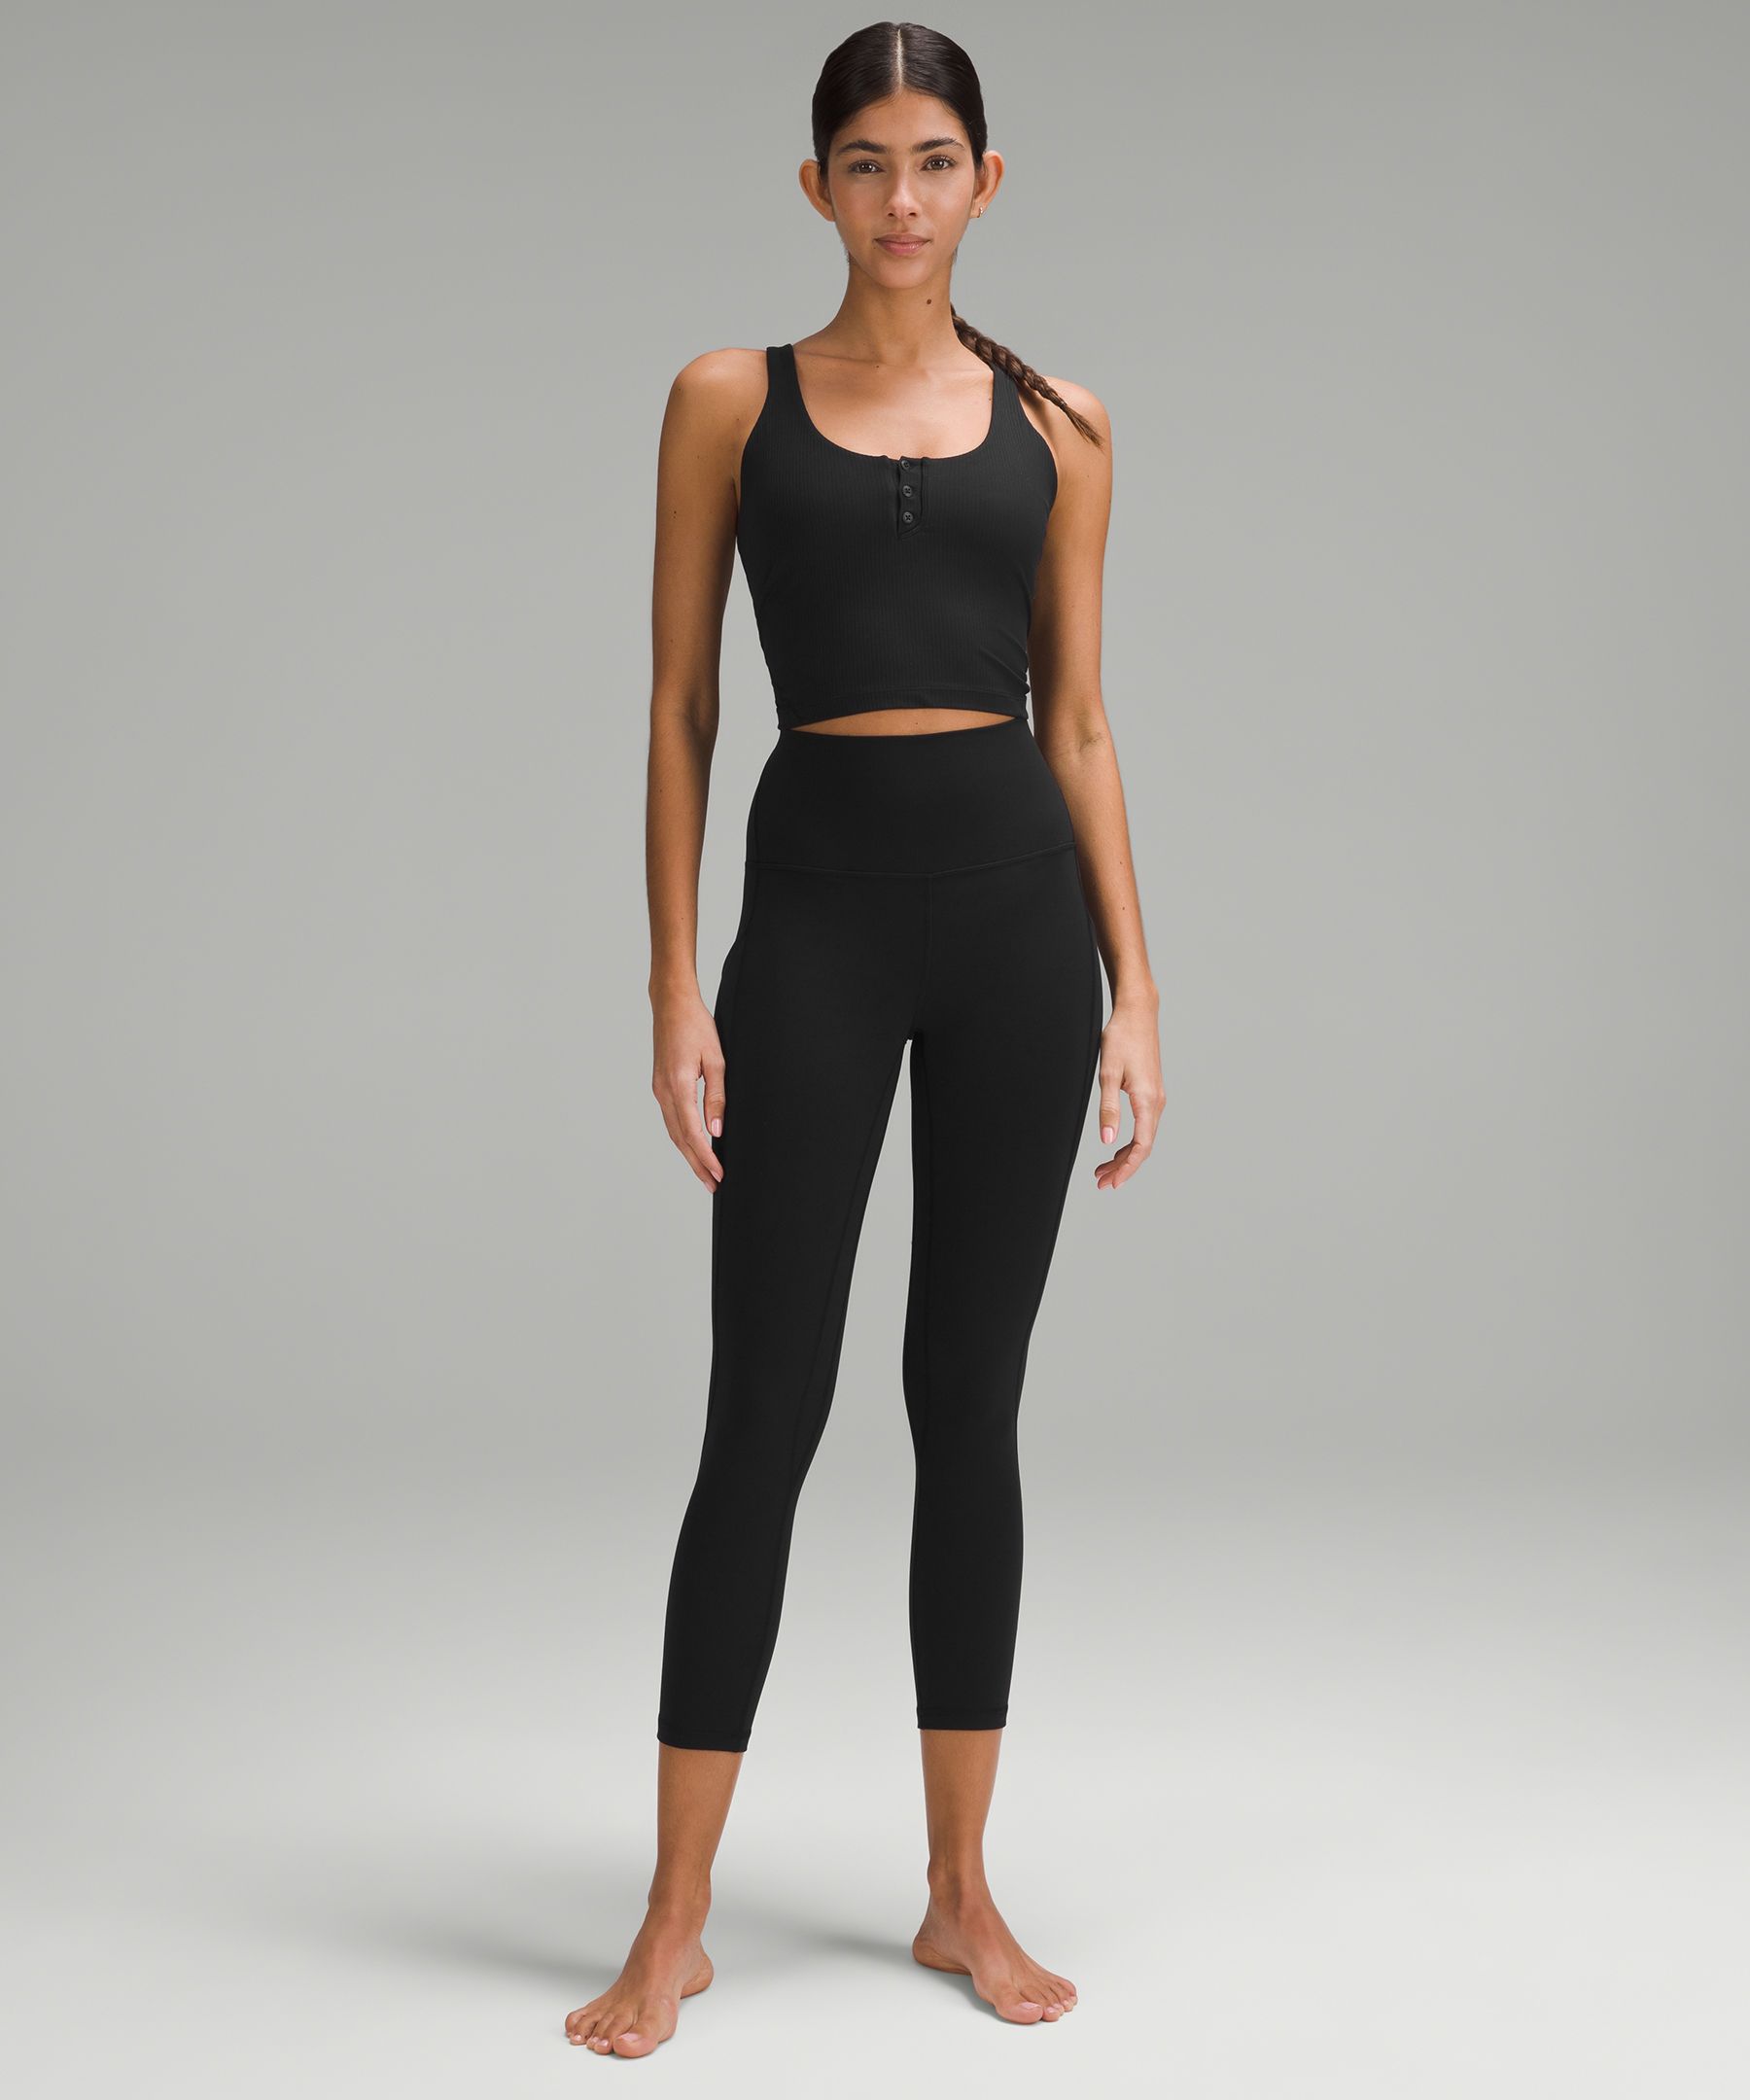 Lululemon Try On Overview + Looks, Gallery posted by Helen